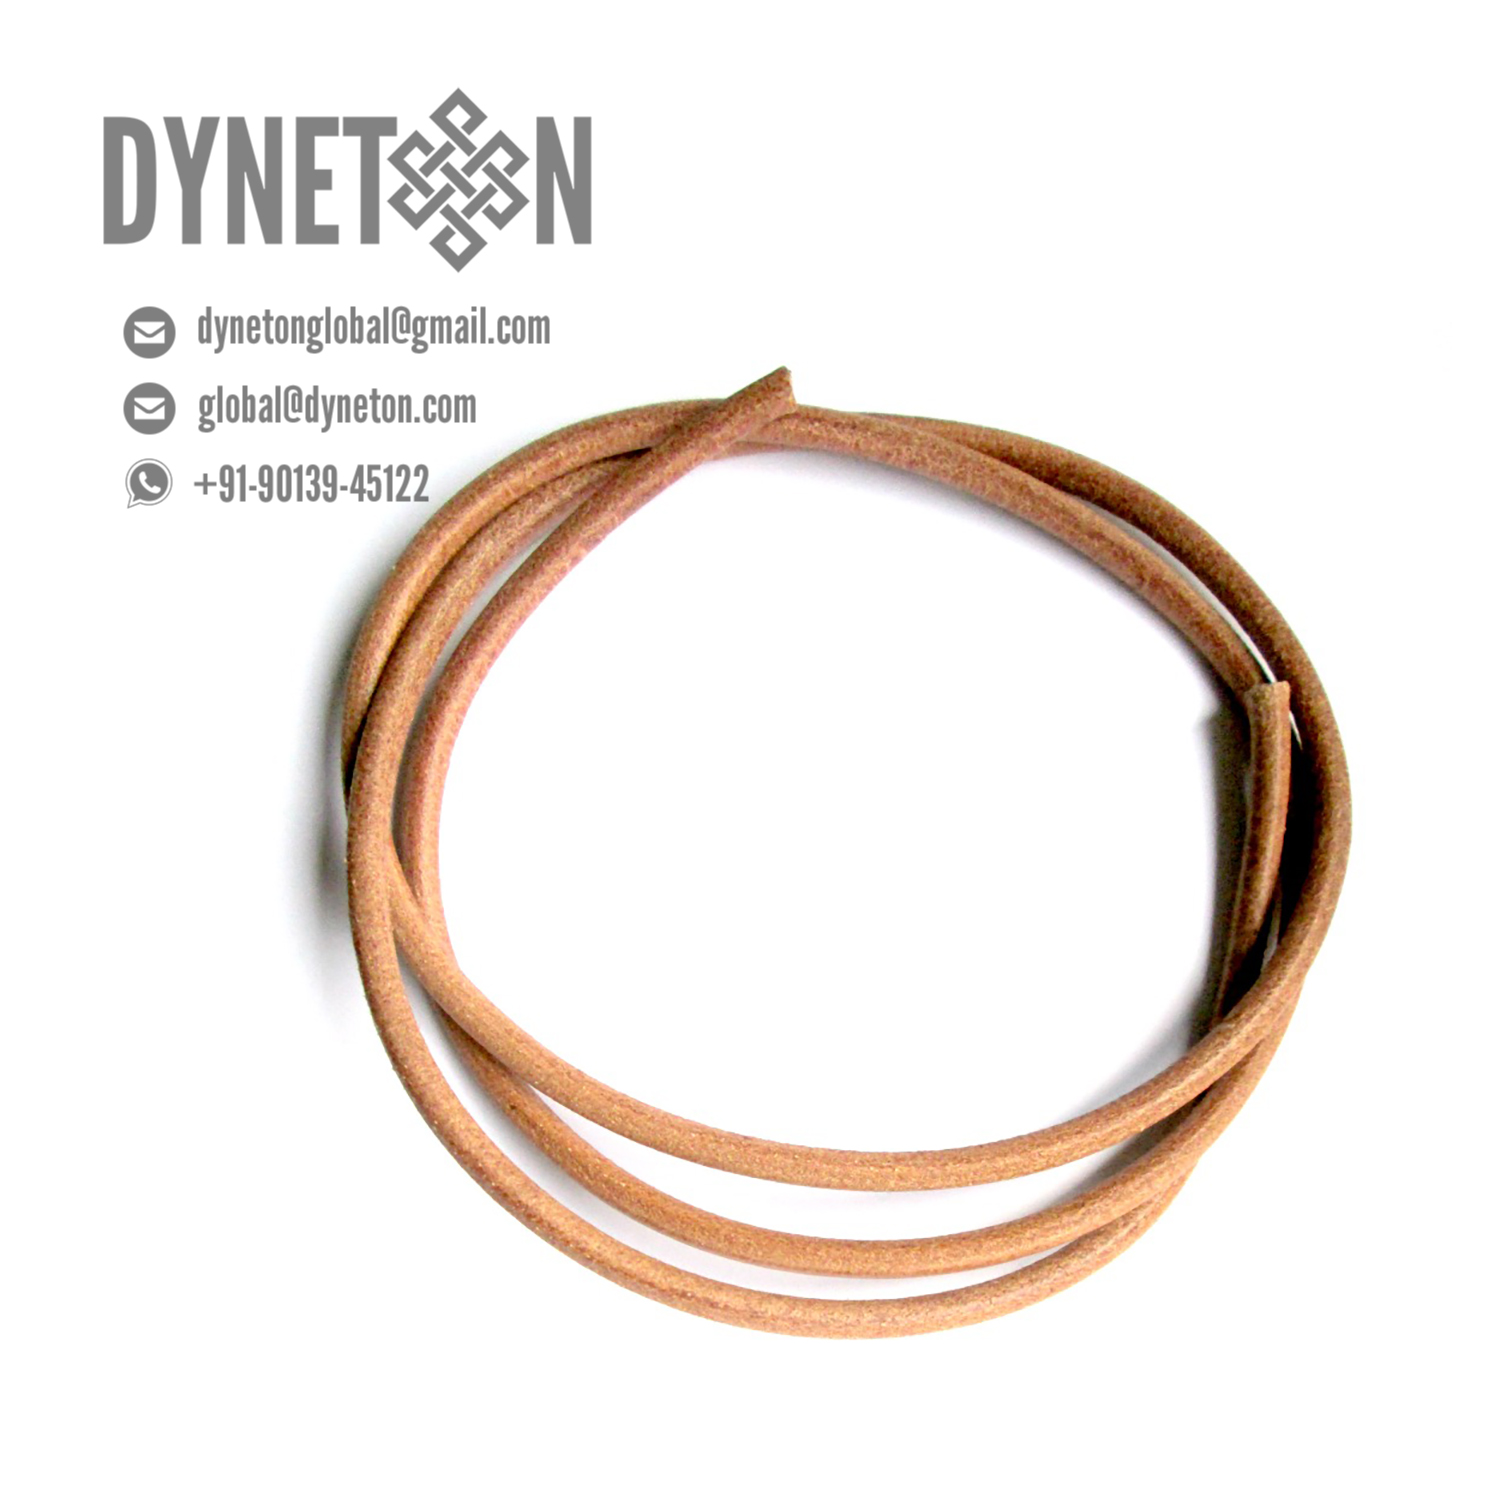 5mm Round Leather Cord - DYNETON / Round Leather Cords 5 mm